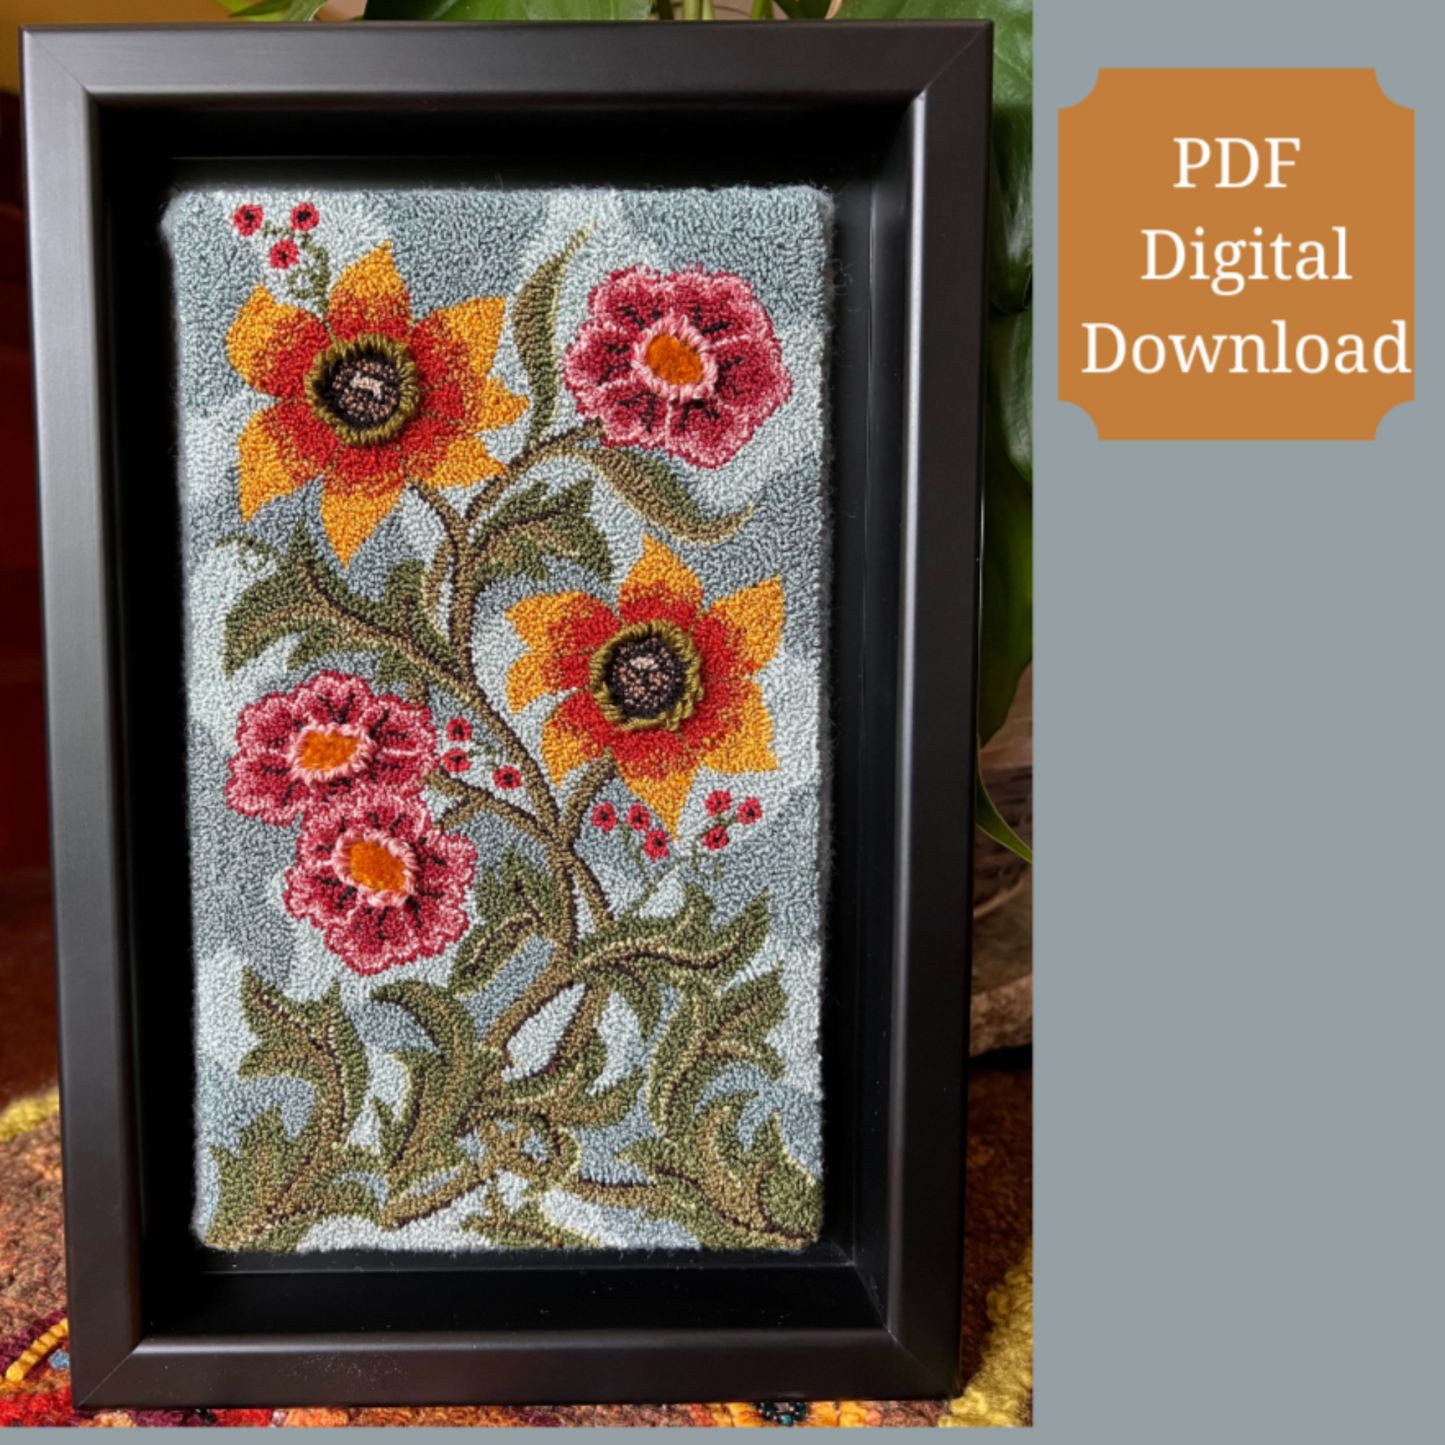 Autumn Sky- Punch Needle PDF Digital Download Pattern, Floral Design By Orphaned Wool